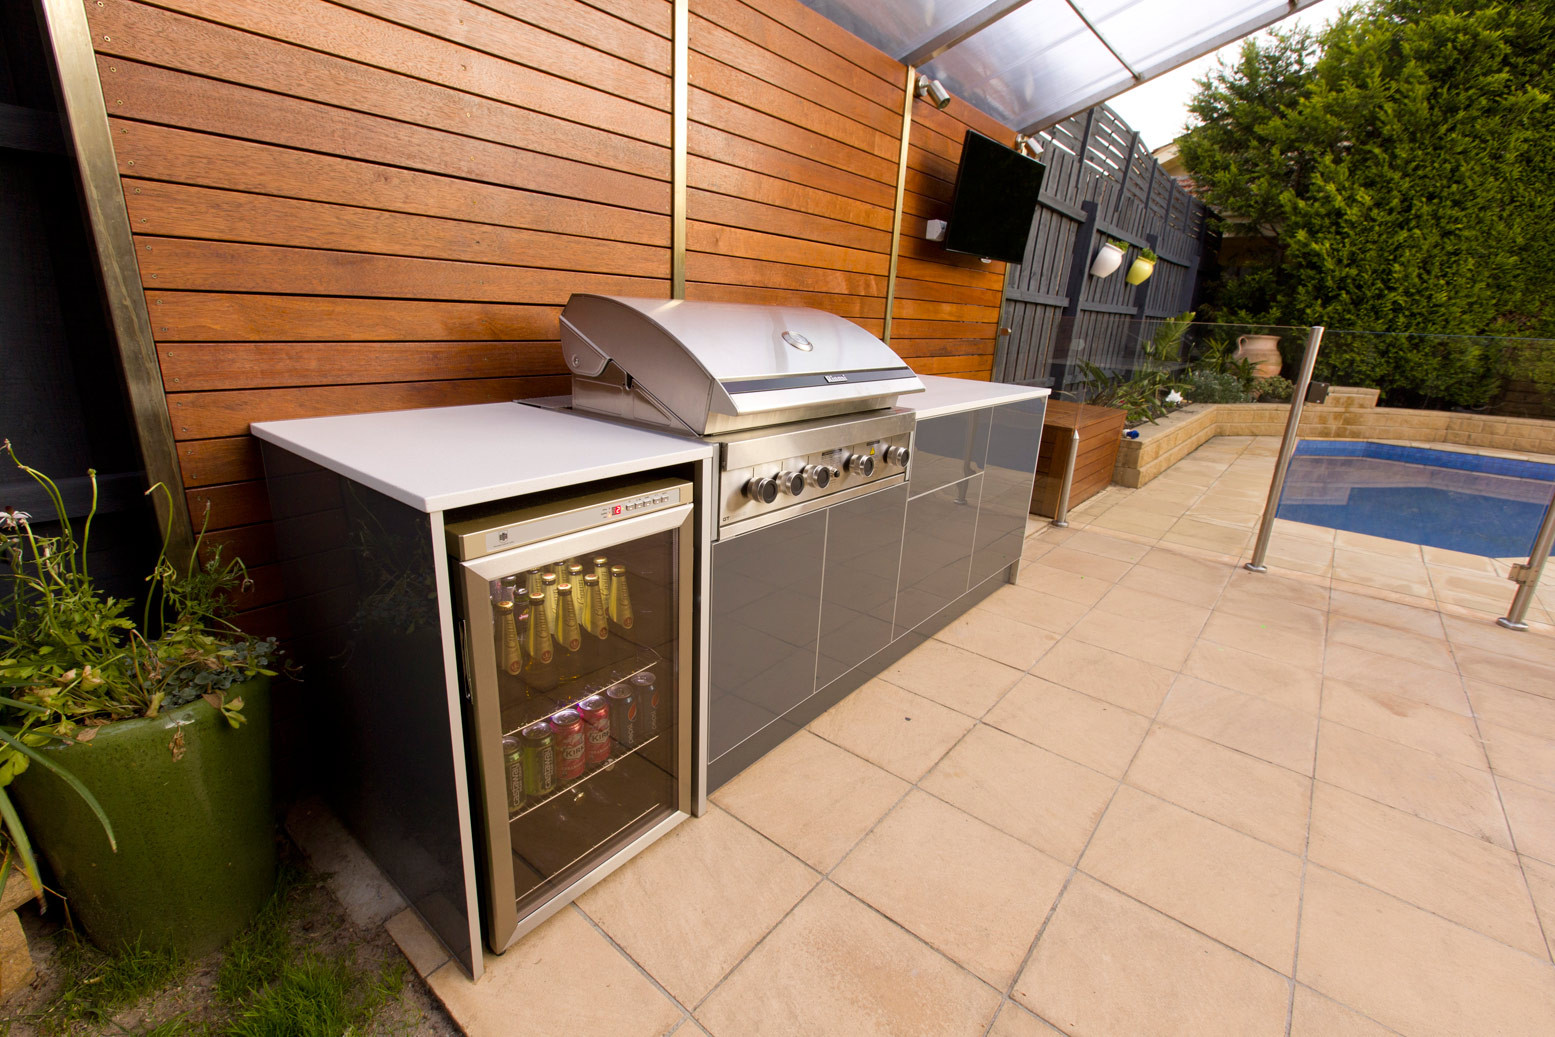 Outdoor Kitchen Cabinet Ideas
 The Various Re mendations and Ideas of the Materials of